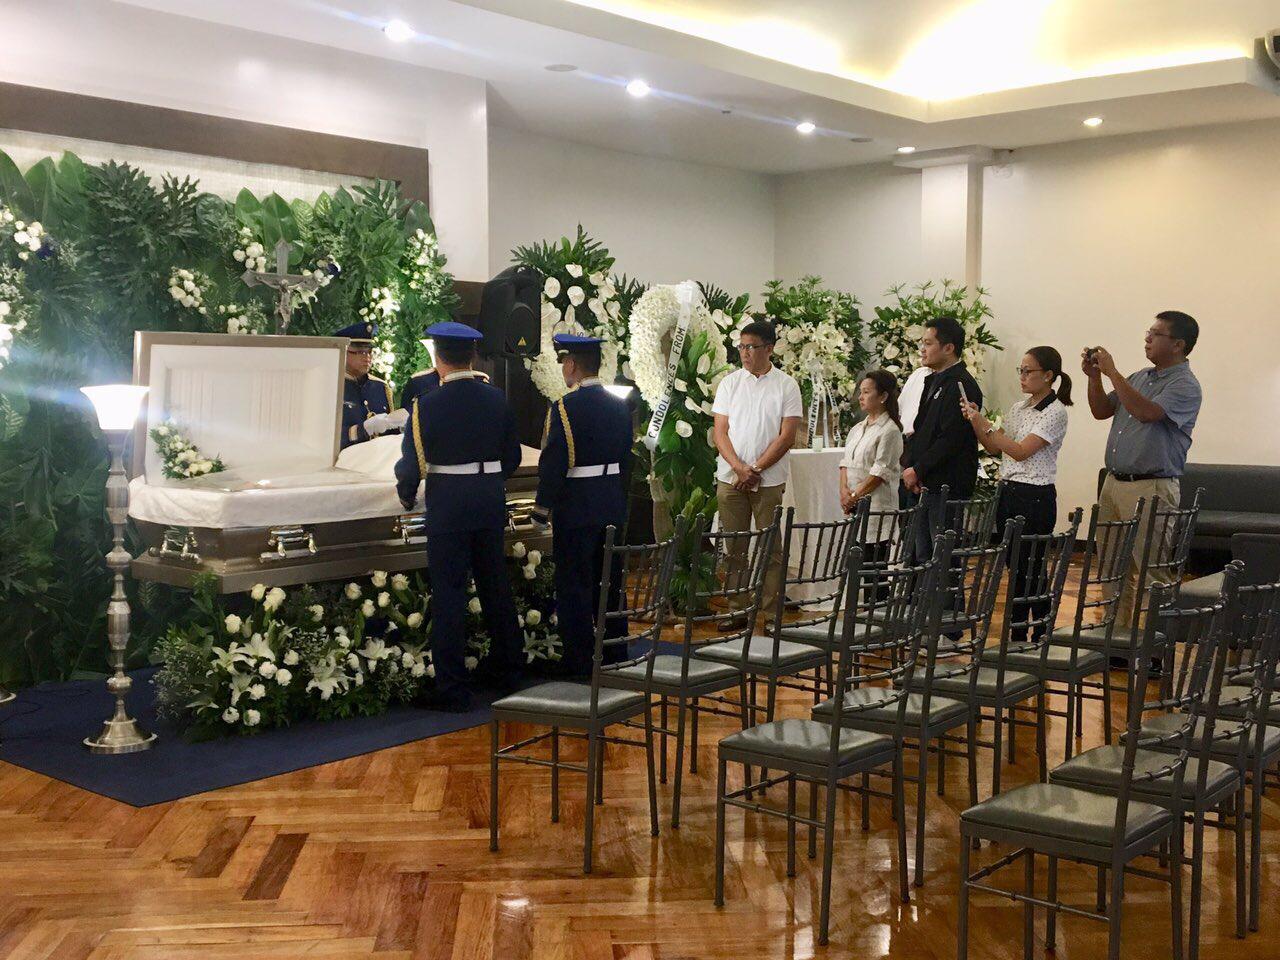 SGMA and SecGen Bobby Maling this morning at the ceremonial draping of the Philippine flag on the coffin of late Prospero Nograles at the Heritage Park, Taguig. Photo from House Speaker Gloria Macapagal-Arroyo office